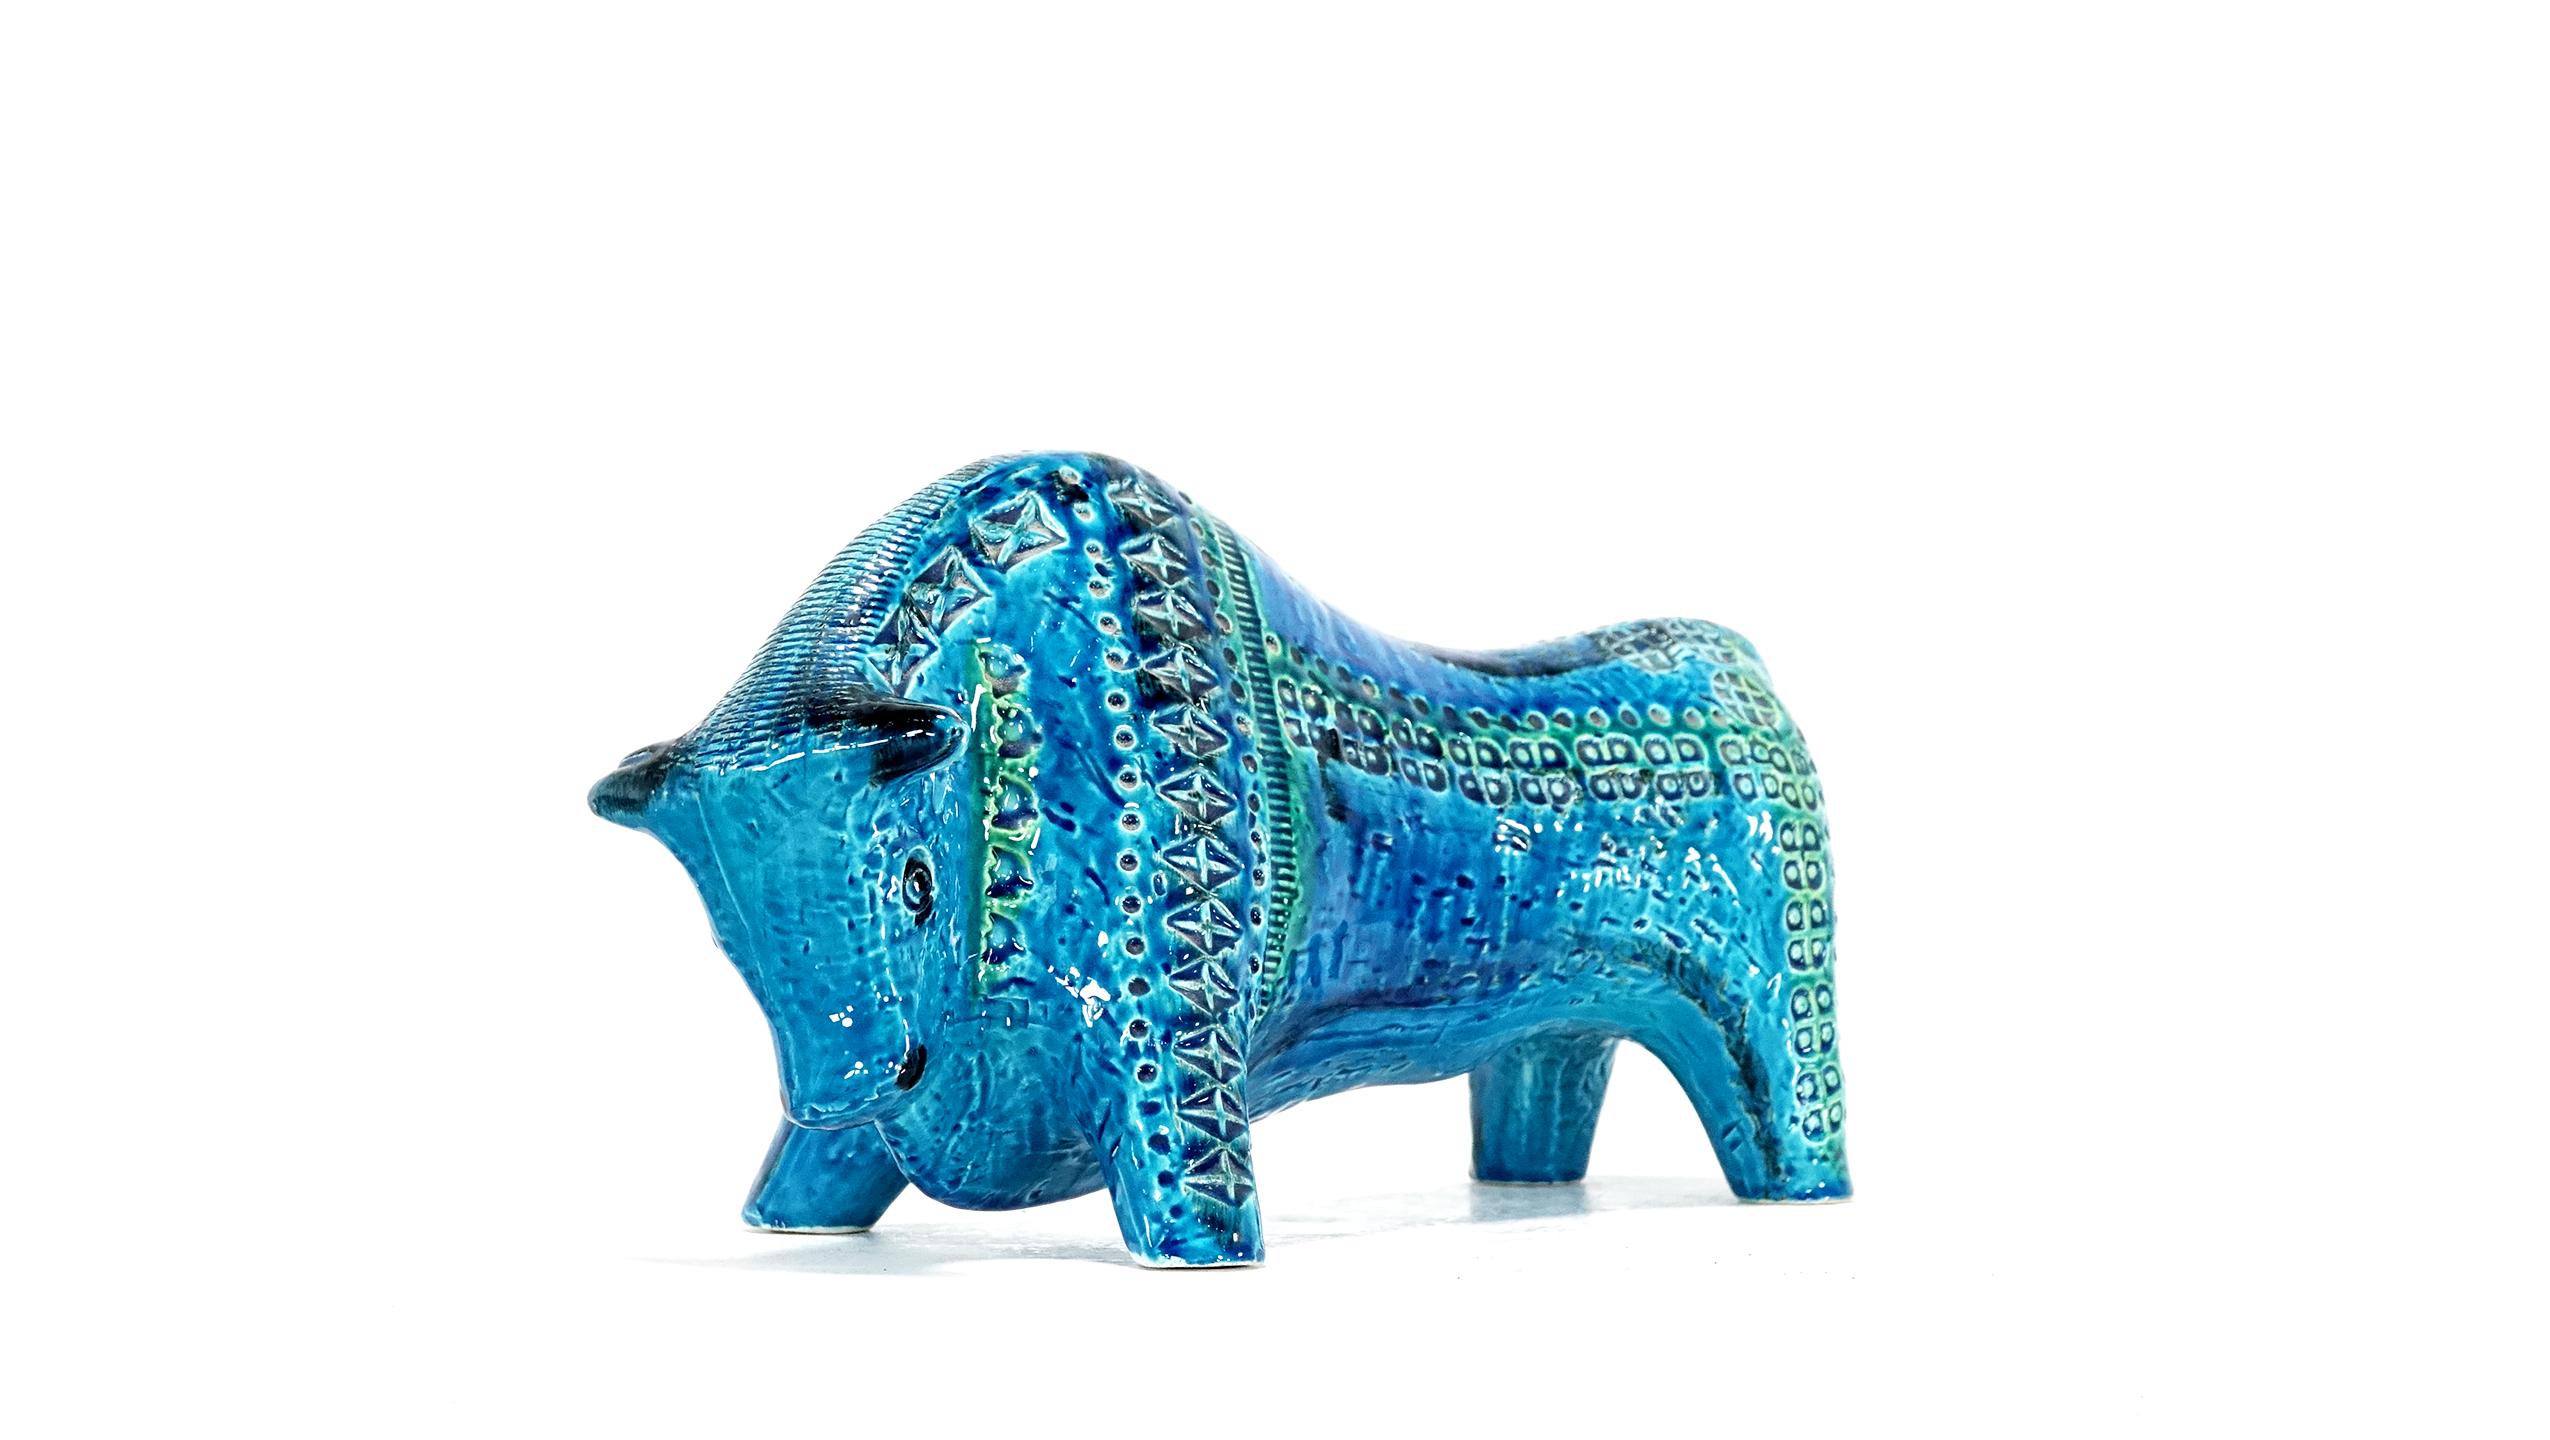 This iconic Rimini Blu Bull ceramic was manufactured, circa 1960. It is one of the quite rare big animal models and has an amazing green blue glaze. Aldo Londi was born in Montelupo near Firenze where he grew up in a big ceramic tradition. In the